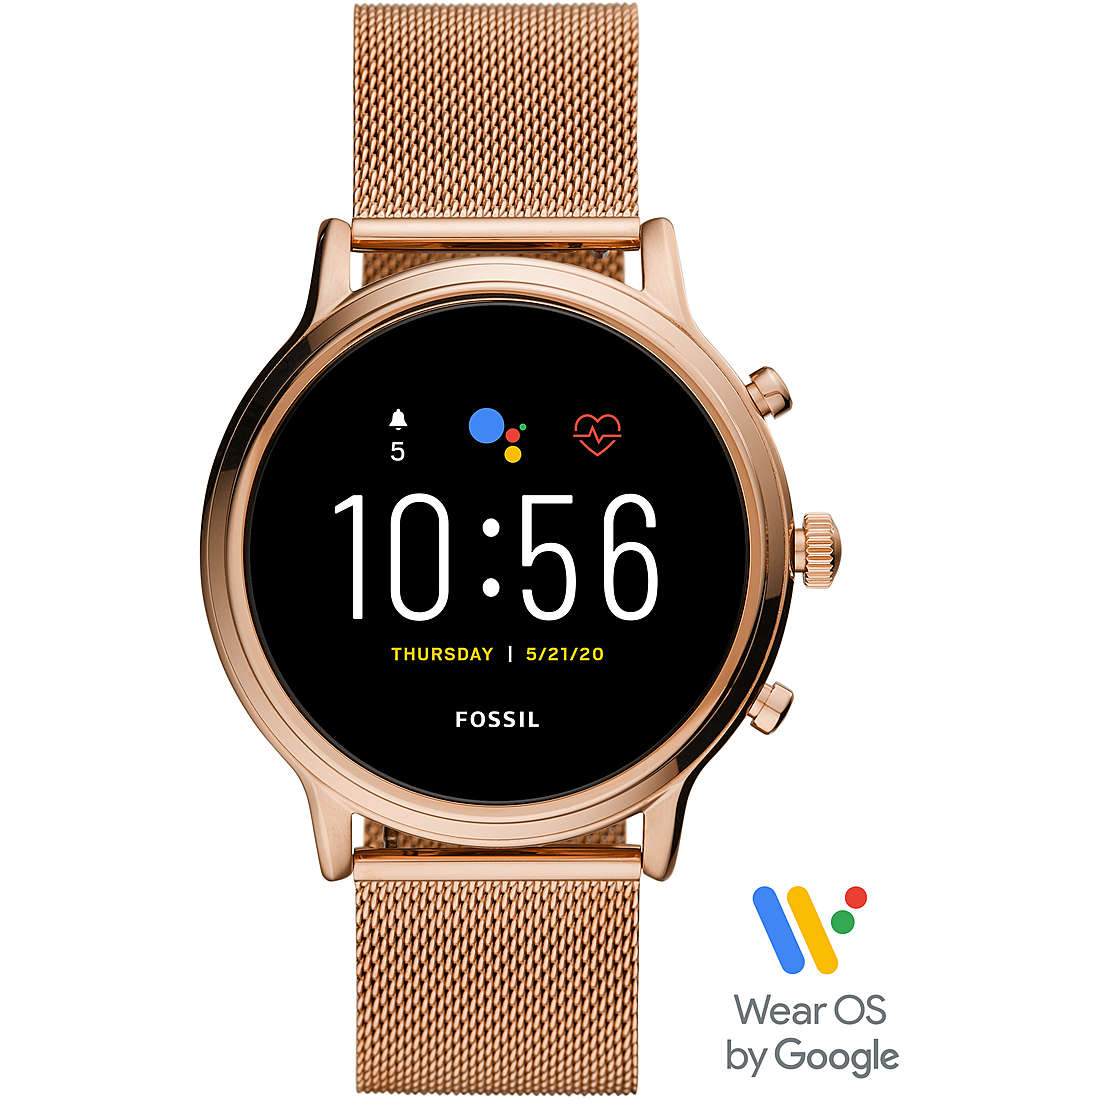 Fossil orologio Smartwatch donna Fossil Spring 2020 CODICE: FTW6062